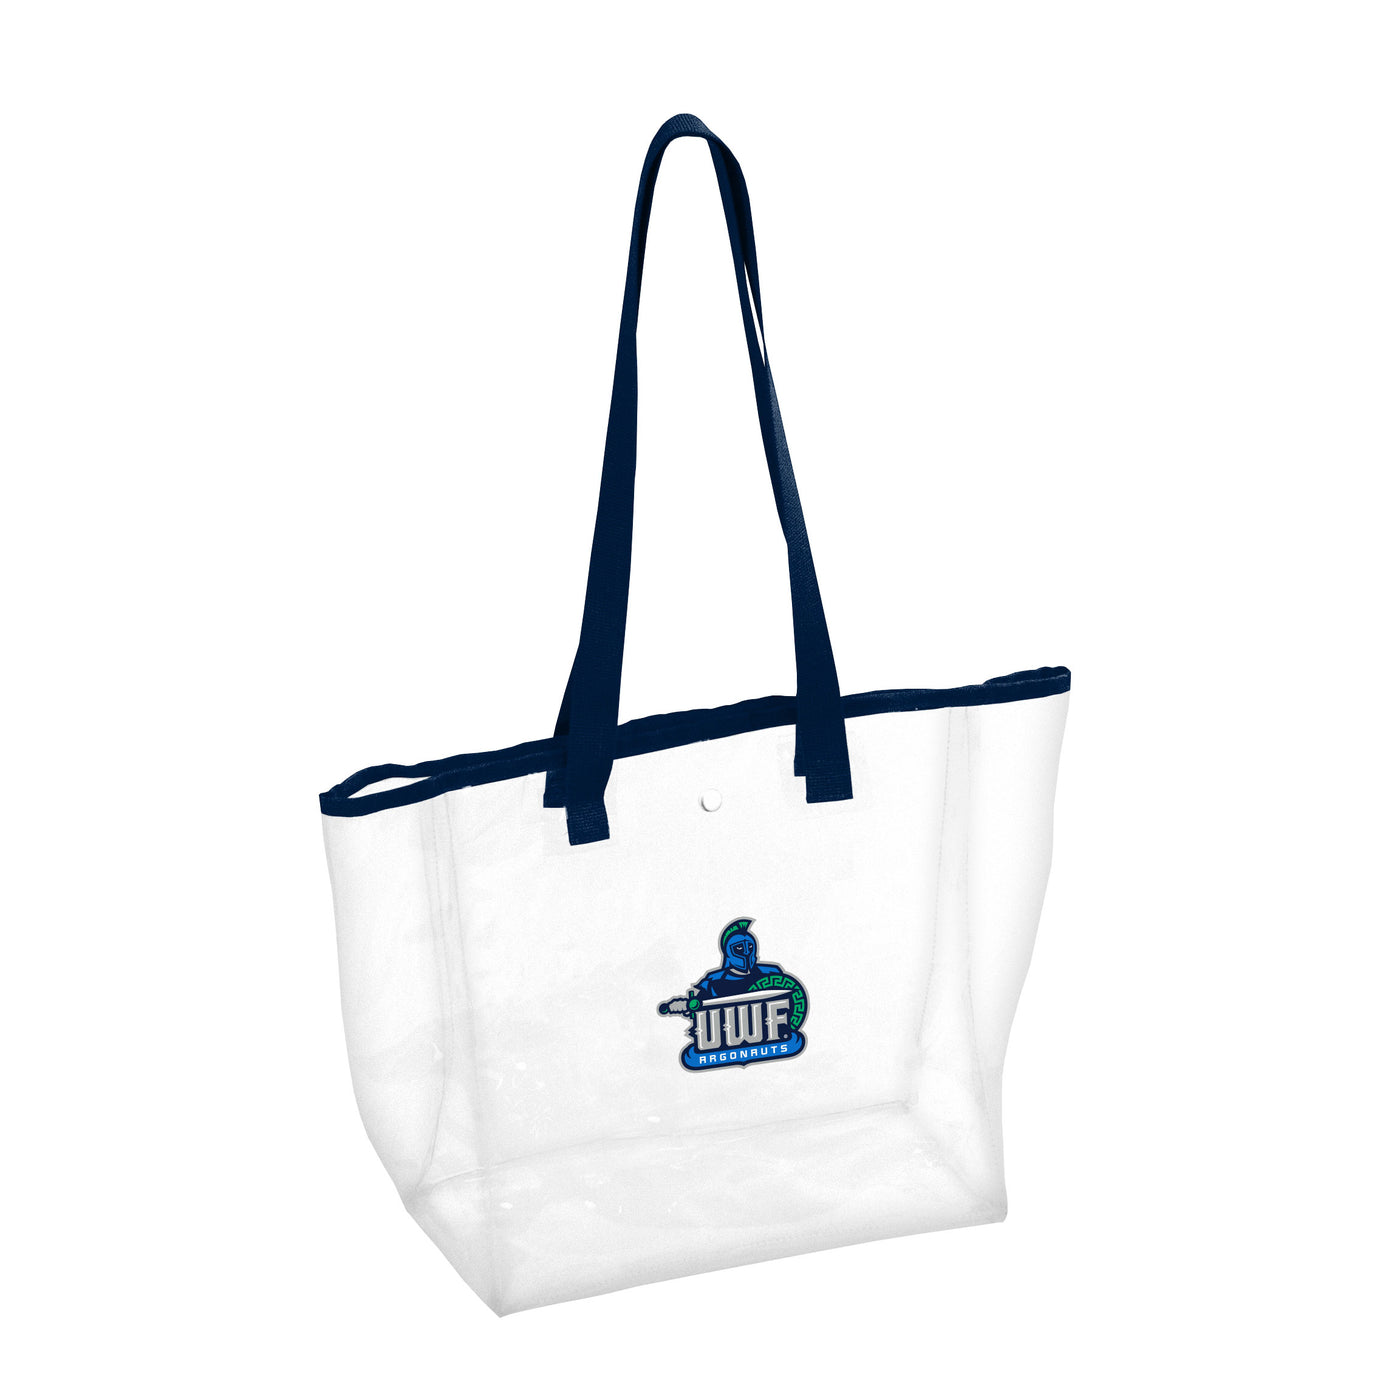 West Florida Clear Tote